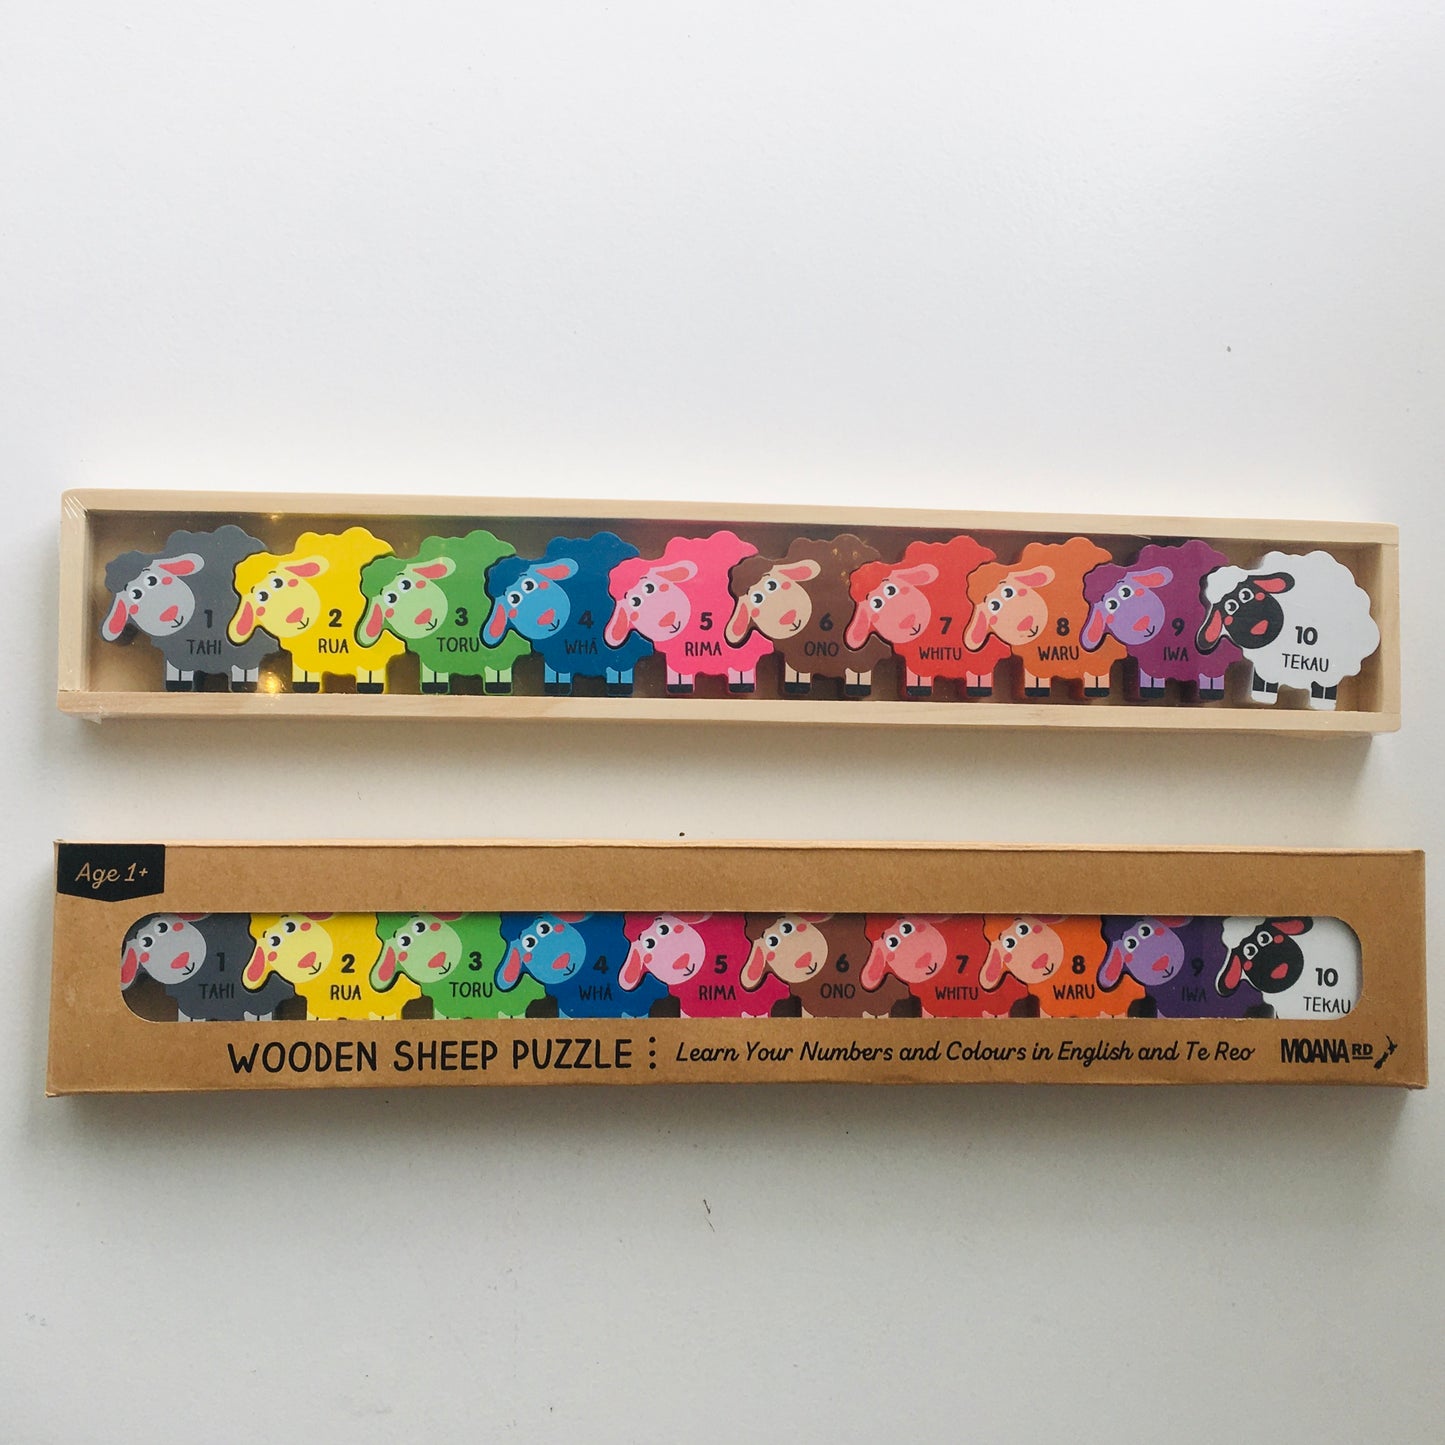 Wooden Sheep Puzzle